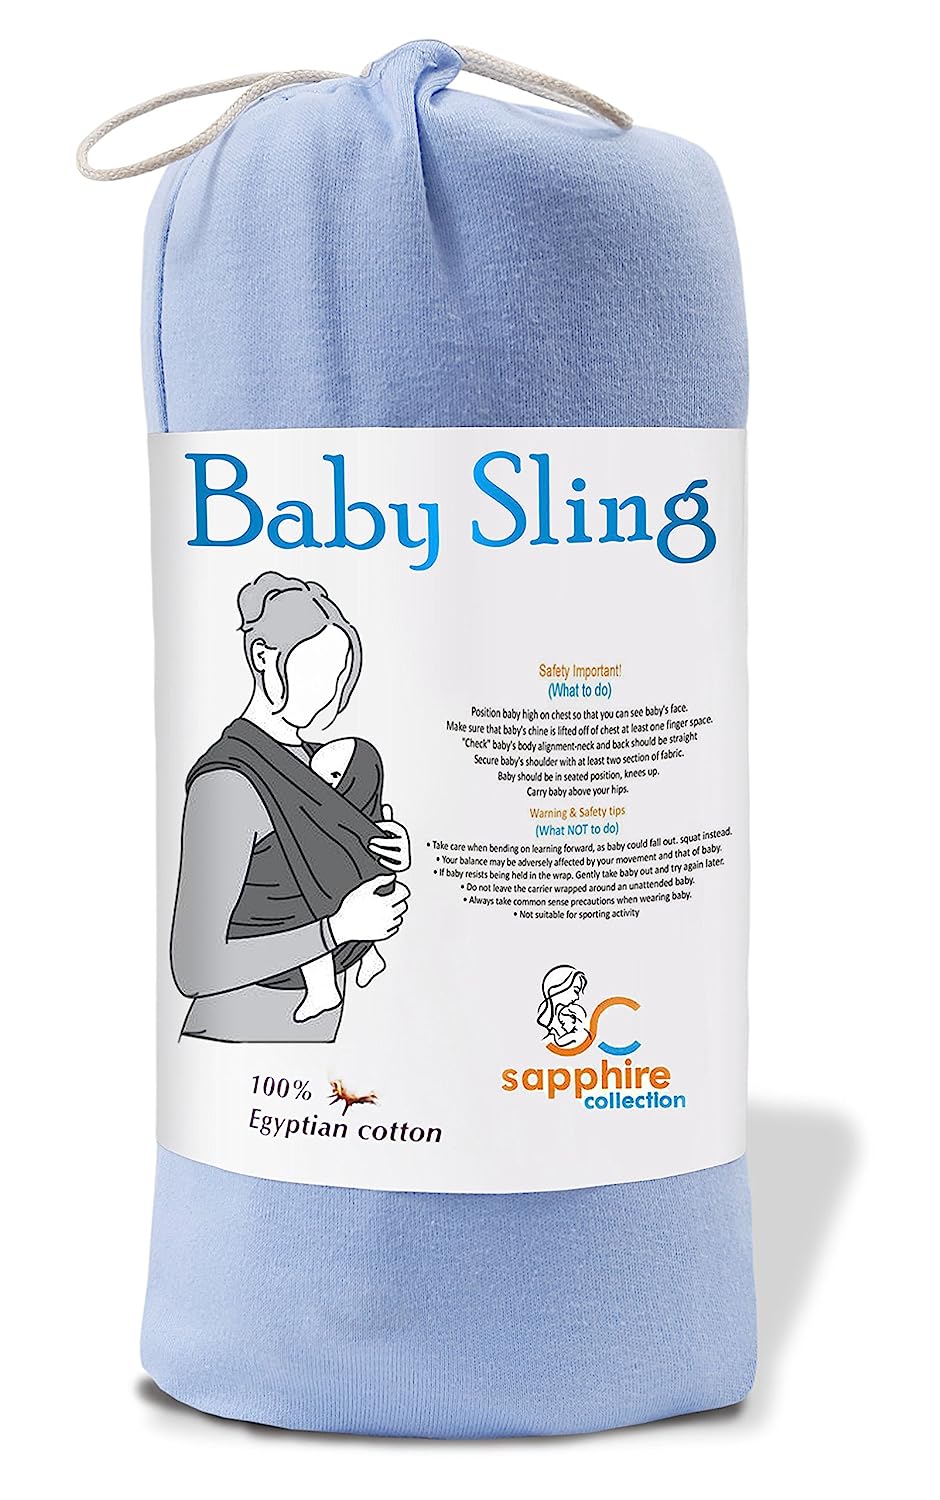 Baby Carrier Sling Stretchy Maternity Rage Cloth – Extra Soft and Light Weight, Quiet – Birth to 3 yrs sky blue